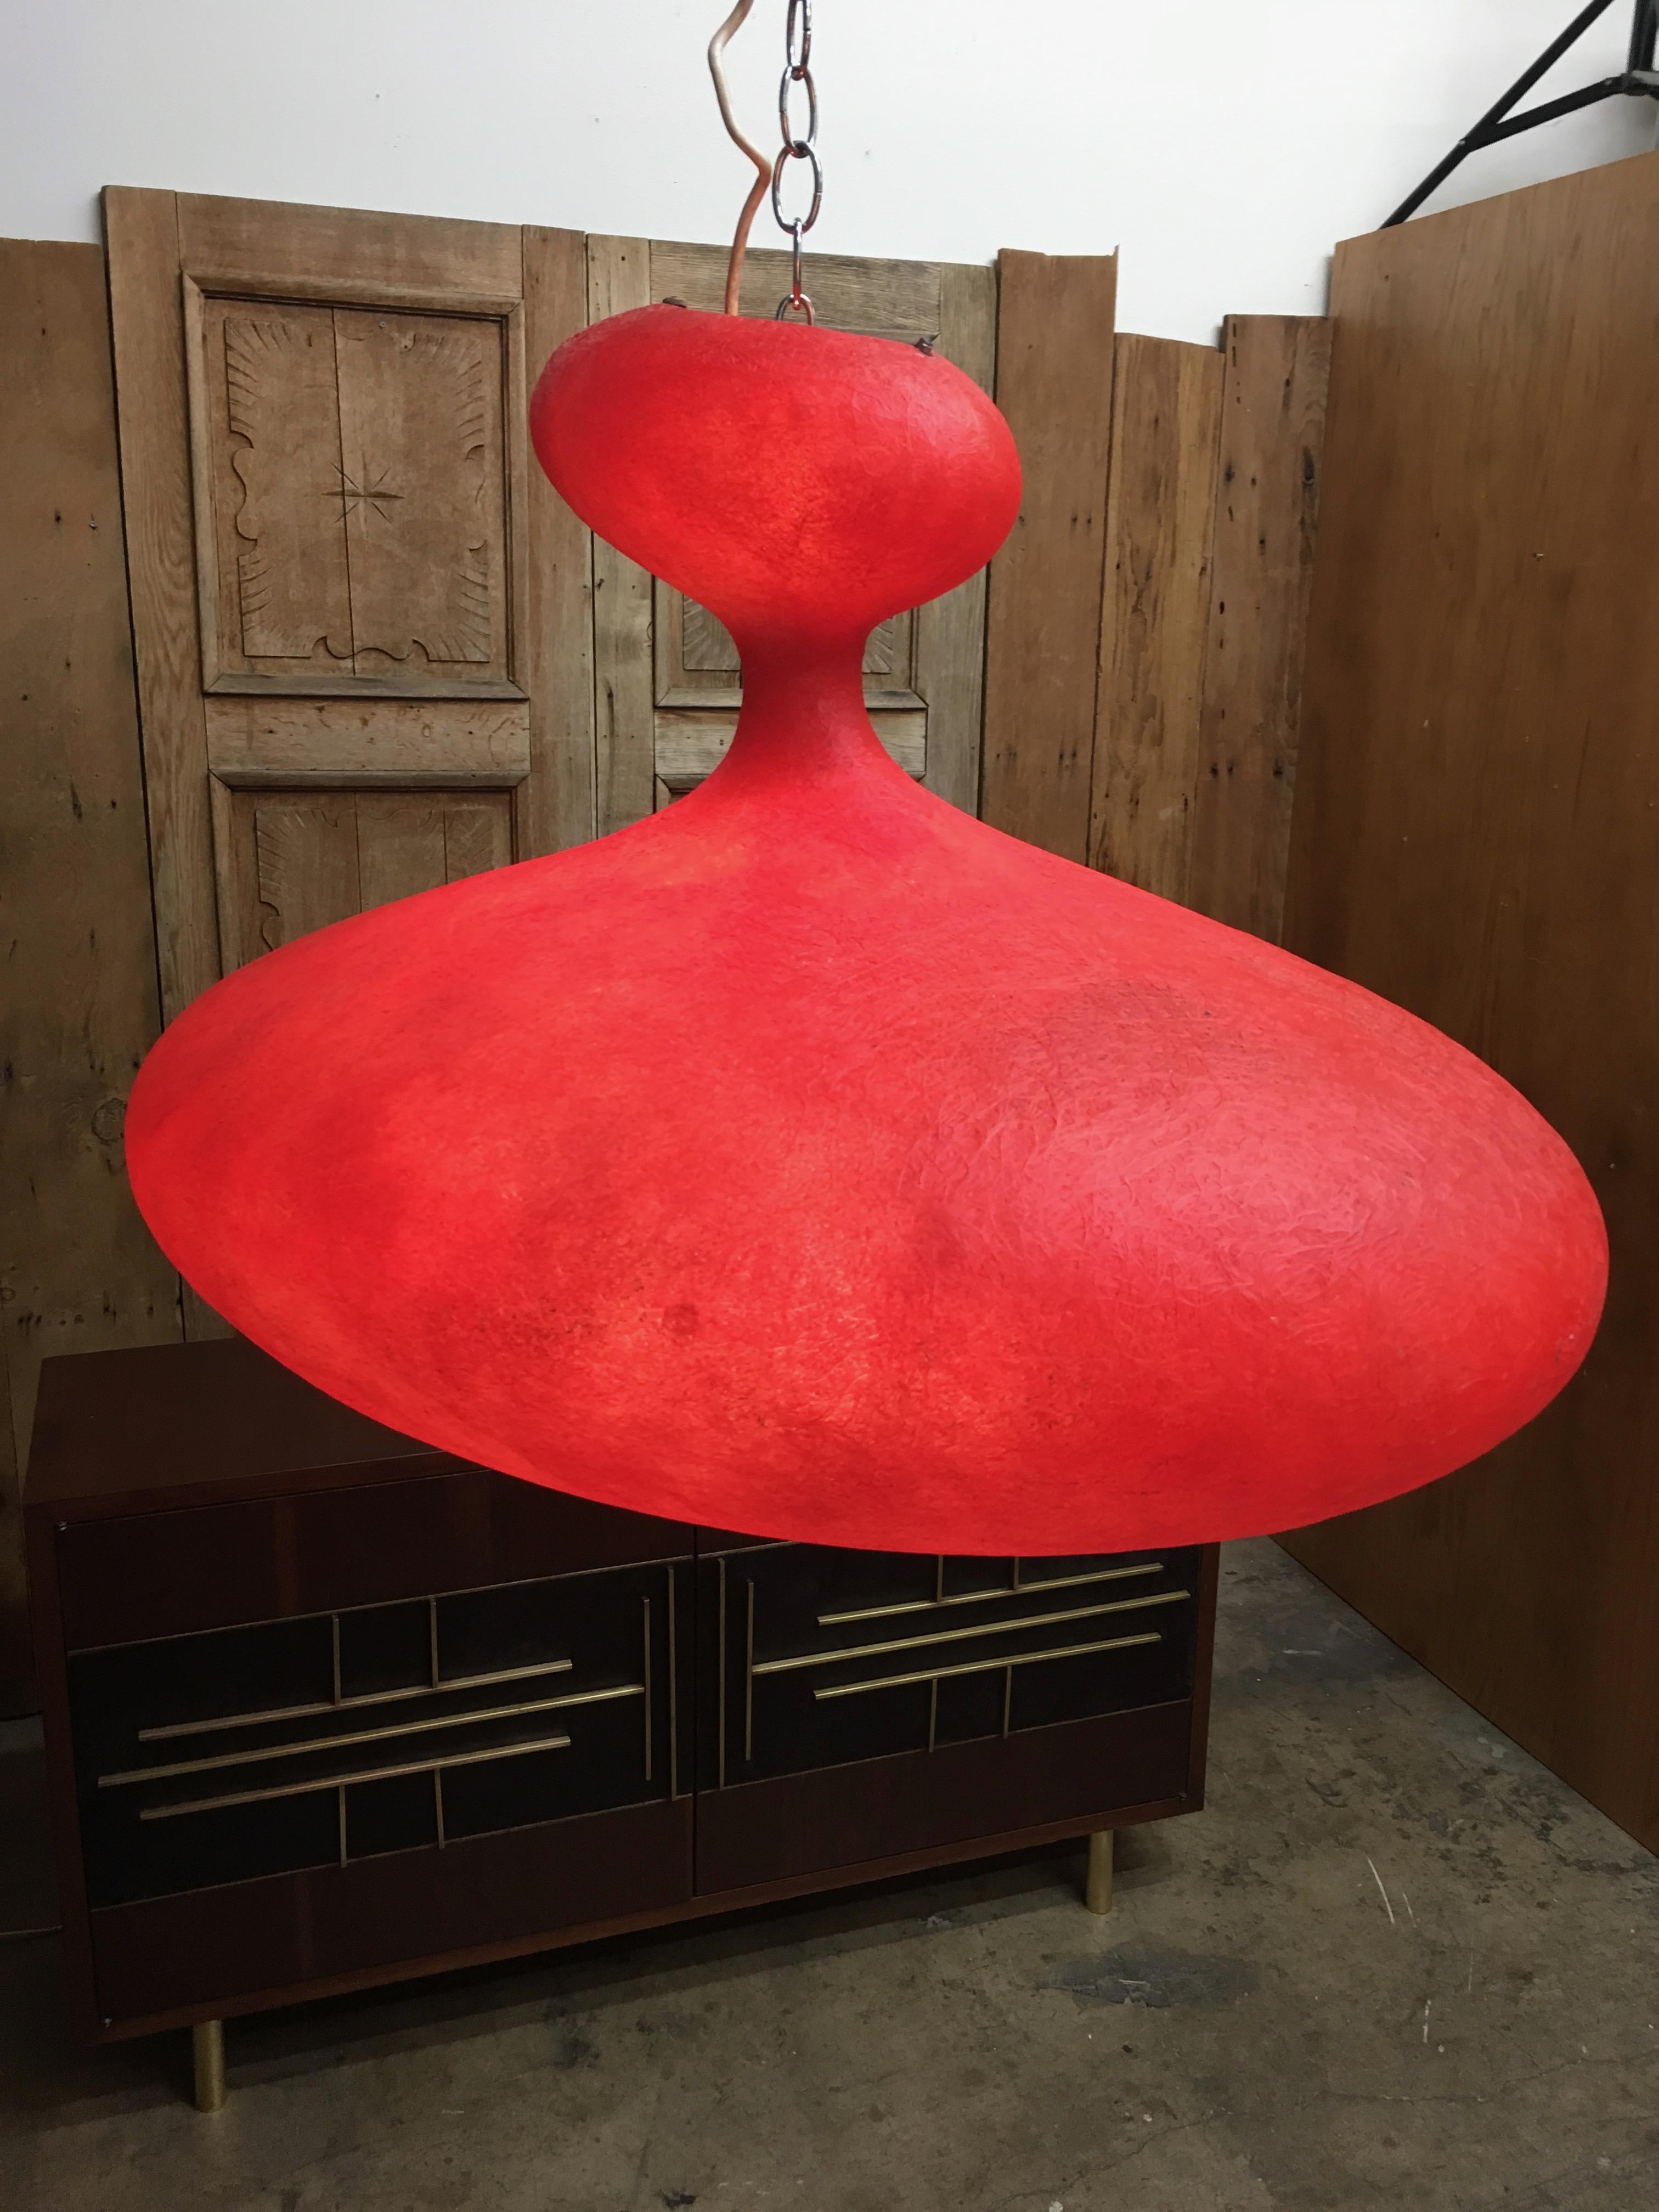 Molded fiberglass ETA pendant lamp made in Italy 1990 by Guglielmo Berchicci. There are 3 available priced separately.